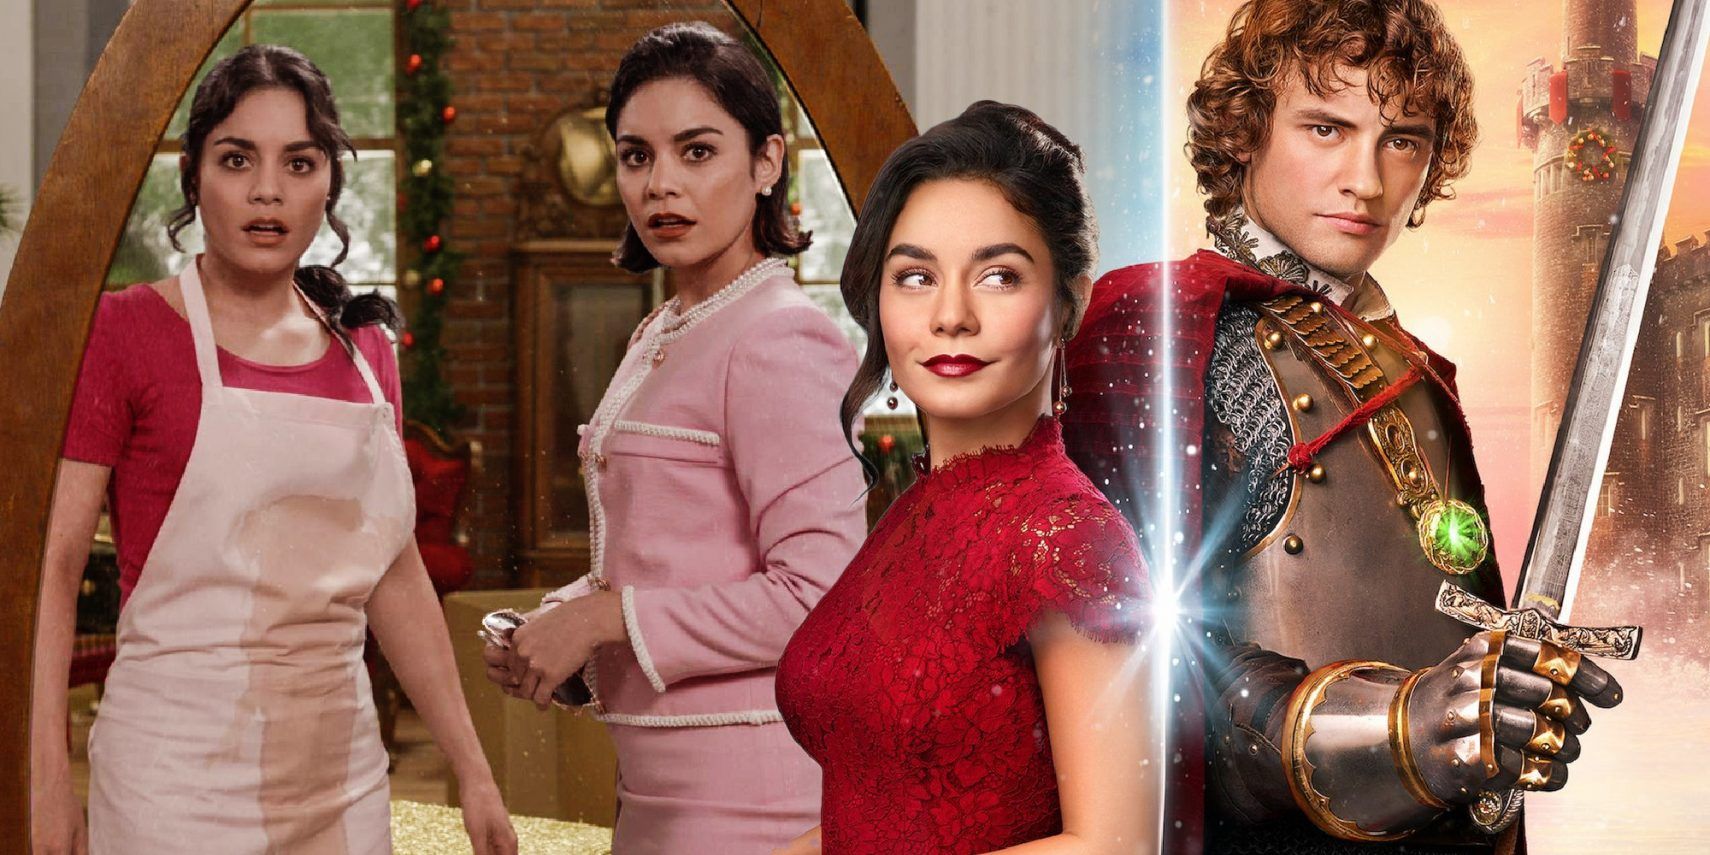 Princess Switch vs. Knight Before Christmas: Which Netflix Films Are Better Vanessa Hudgens